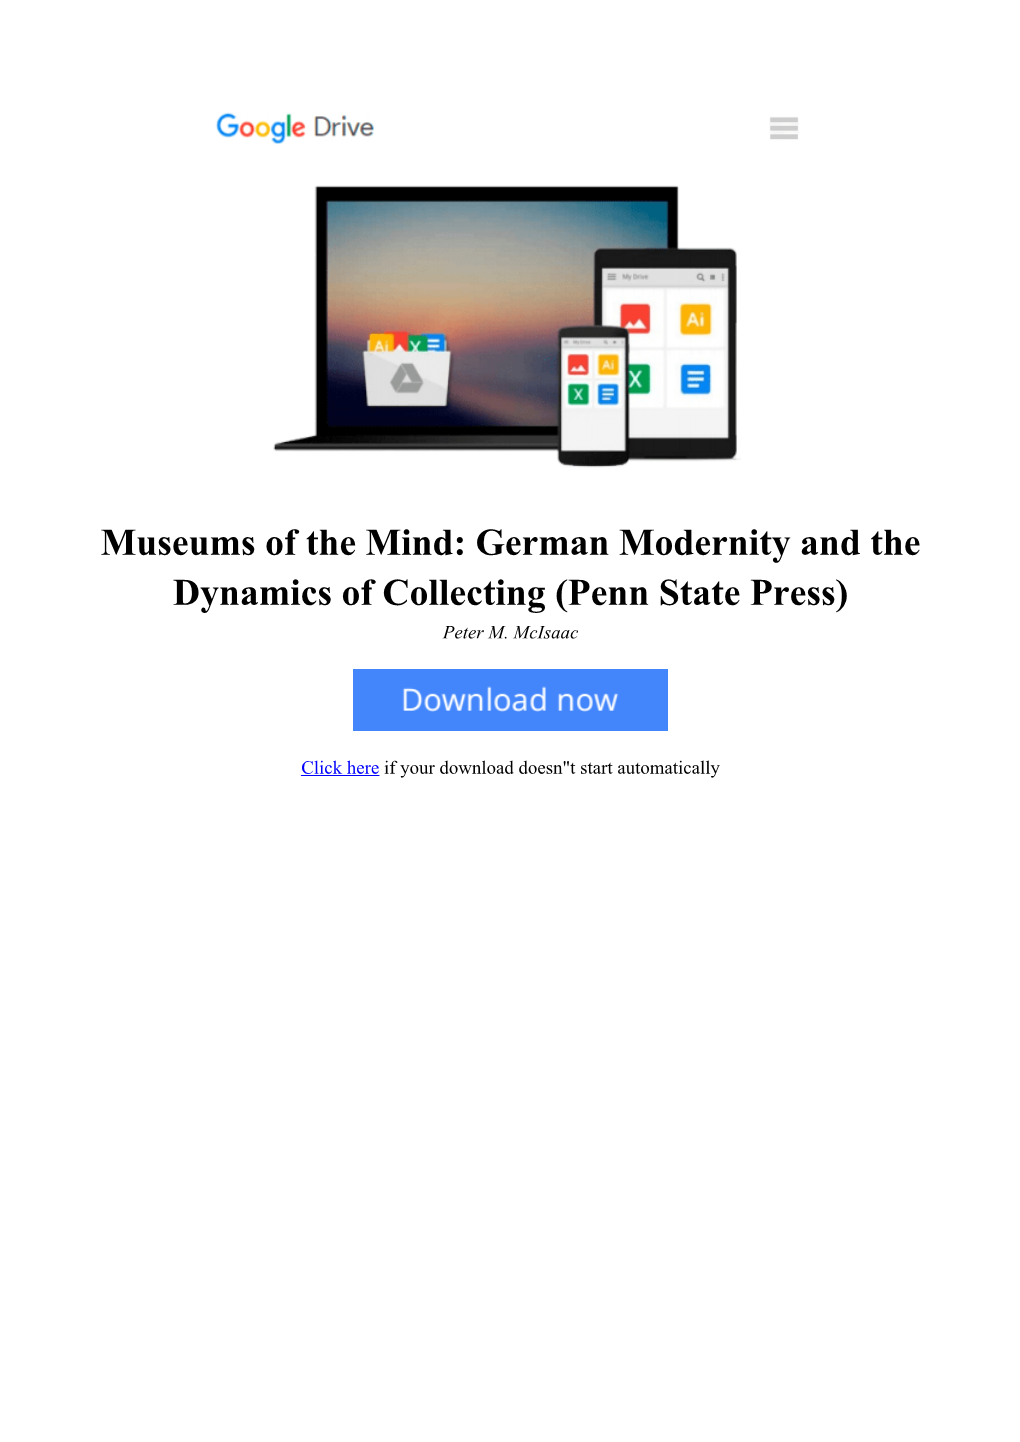 [D3GX]⋙ Museums of the Mind: German Modernity and The